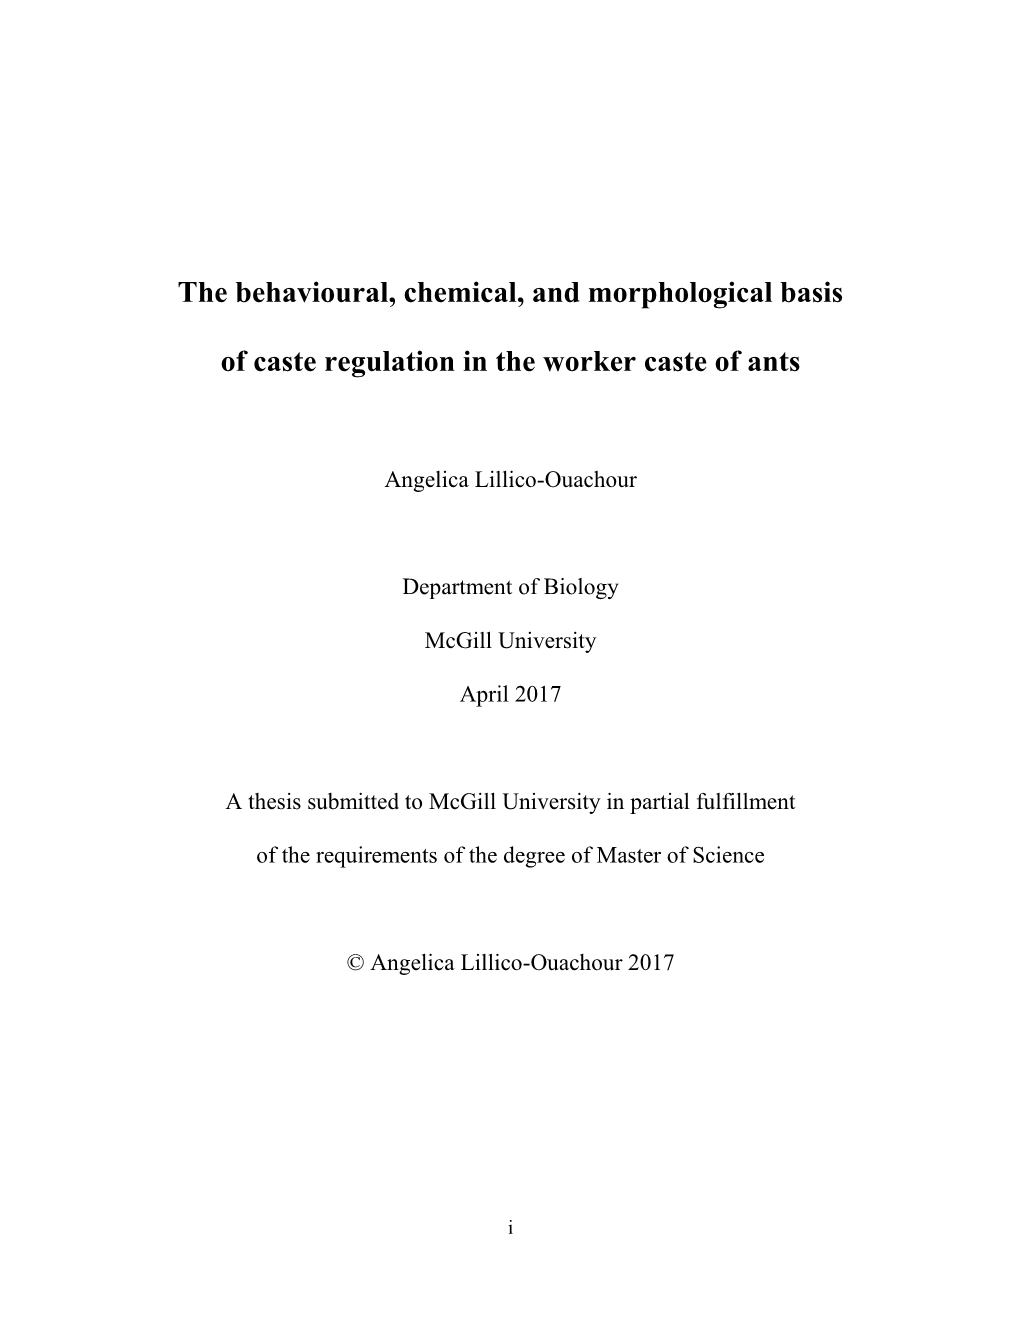 The Behavioural, Chemical, and Morphological Basis of Caste Regulation in the Worker Caste of Ants